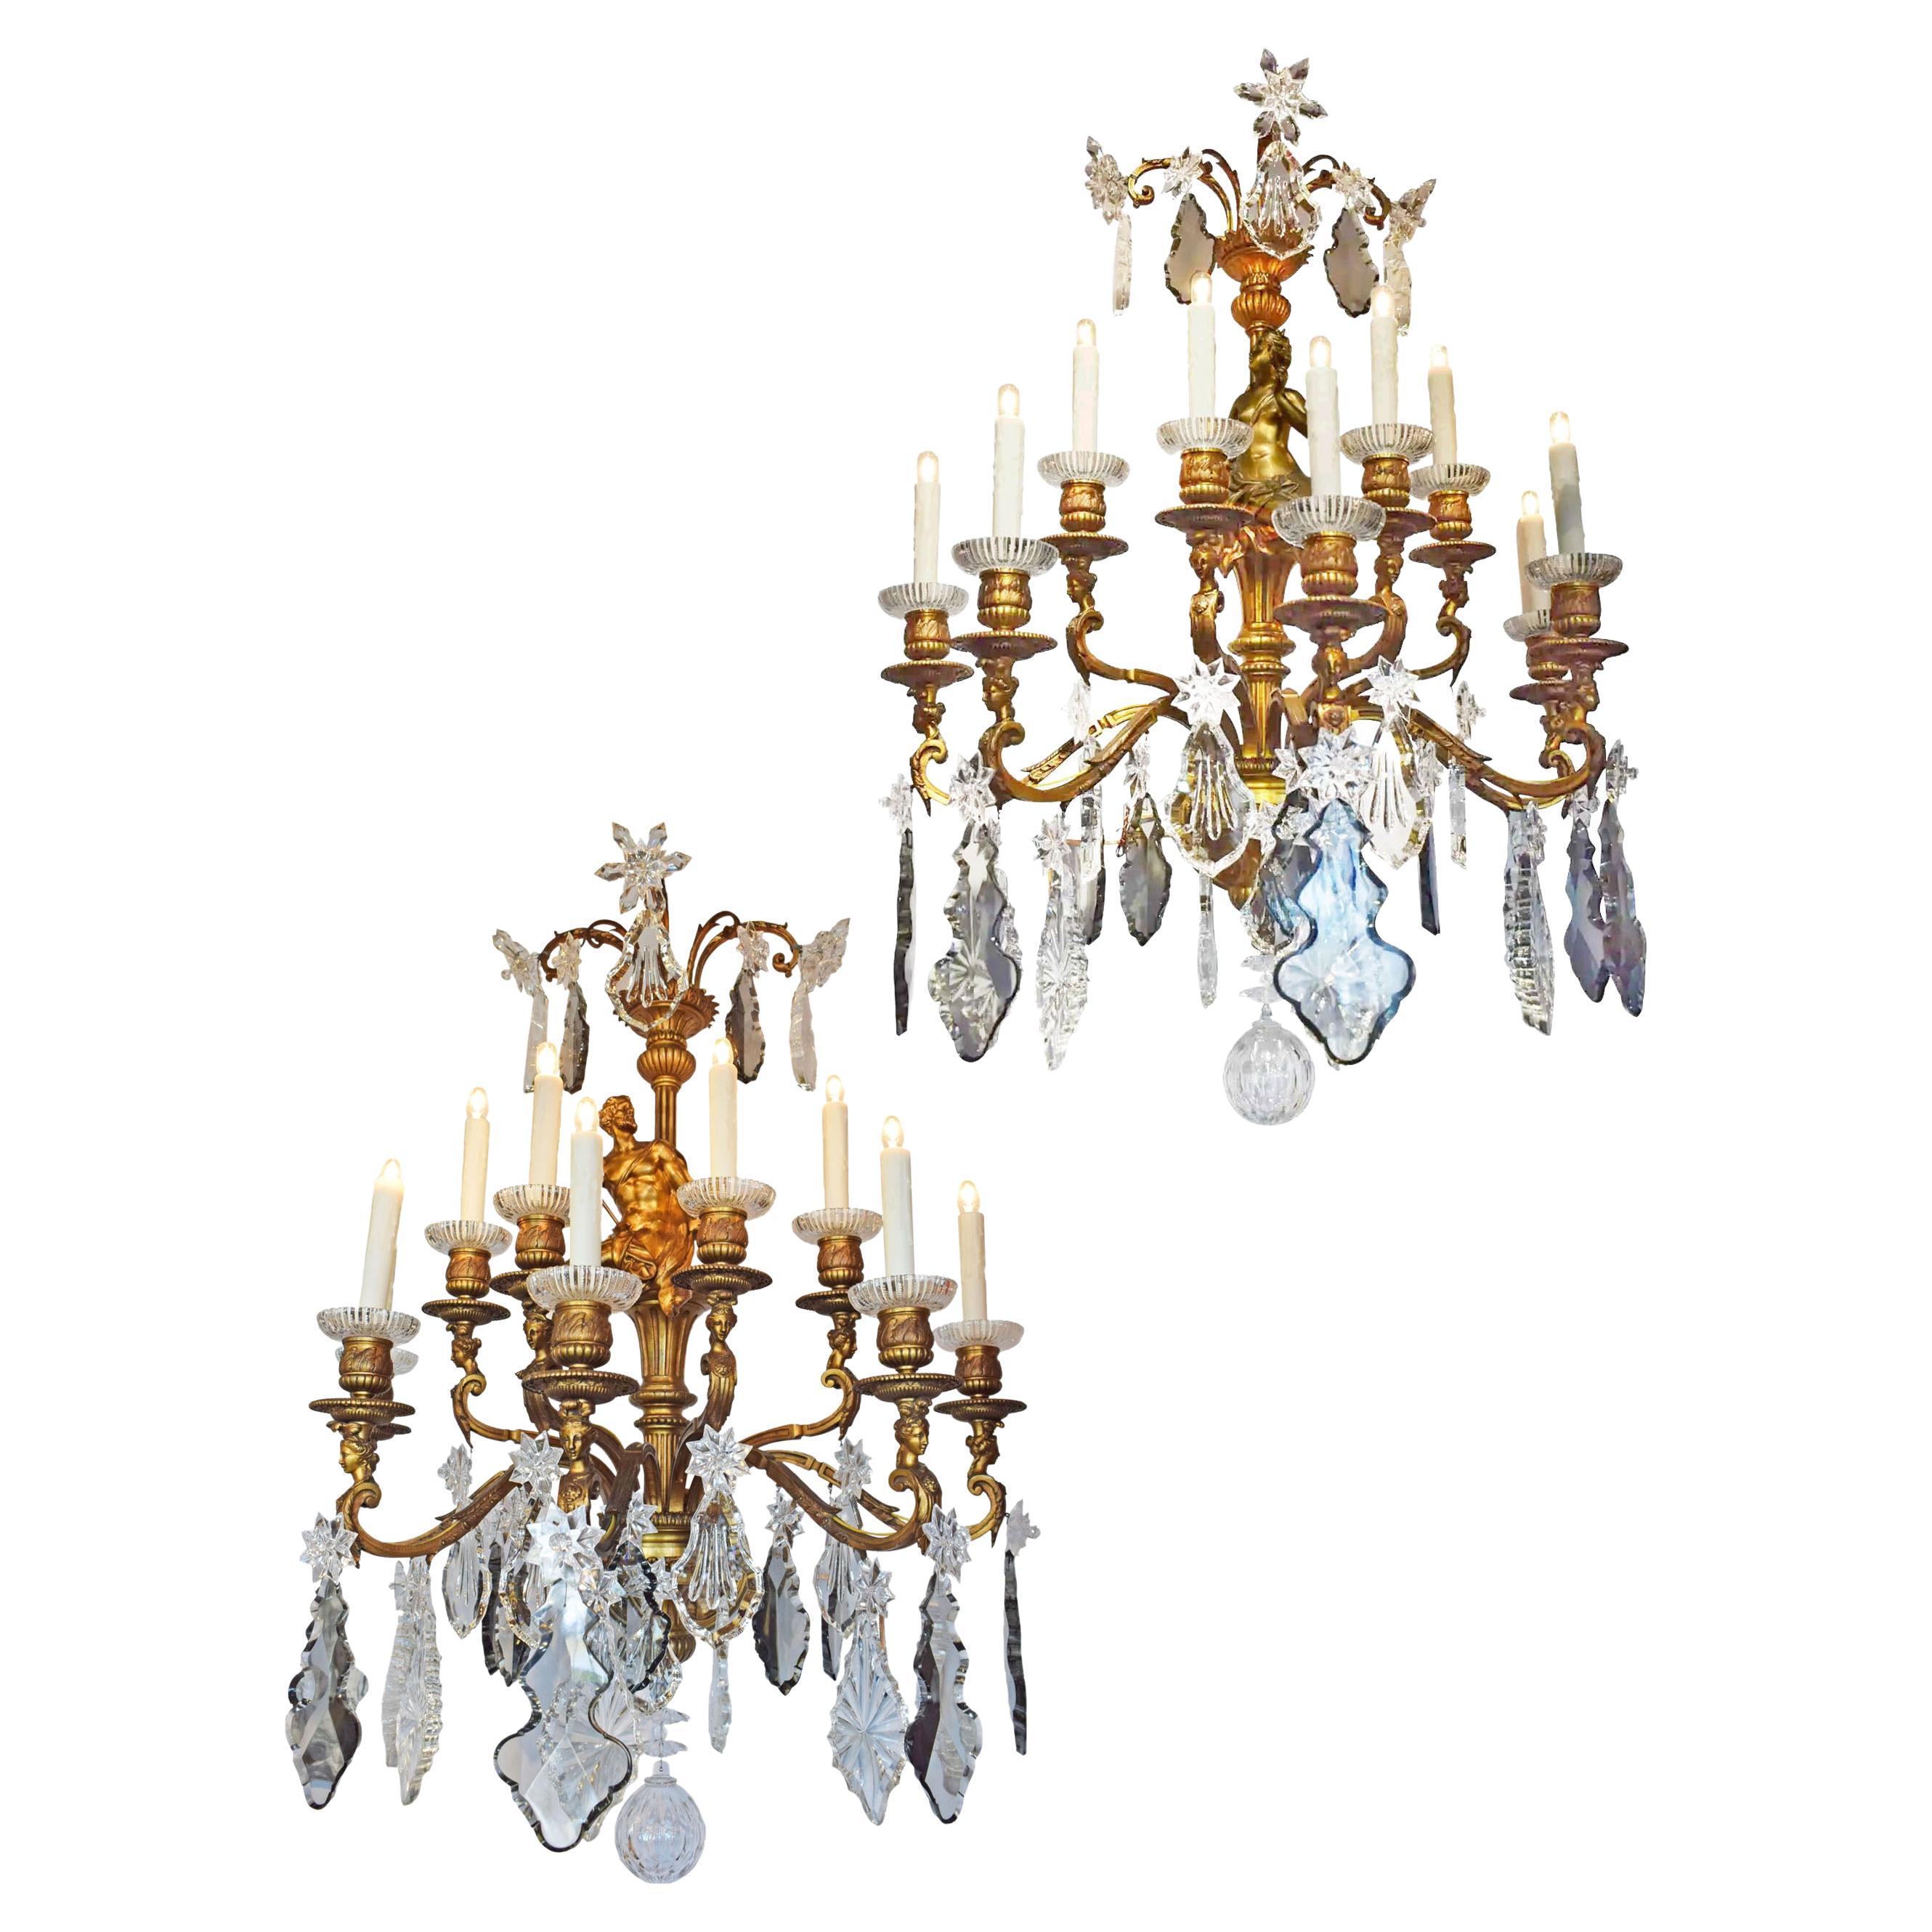 Fabulous Pair of Gilt Bronze and Crystal Wall Sconces